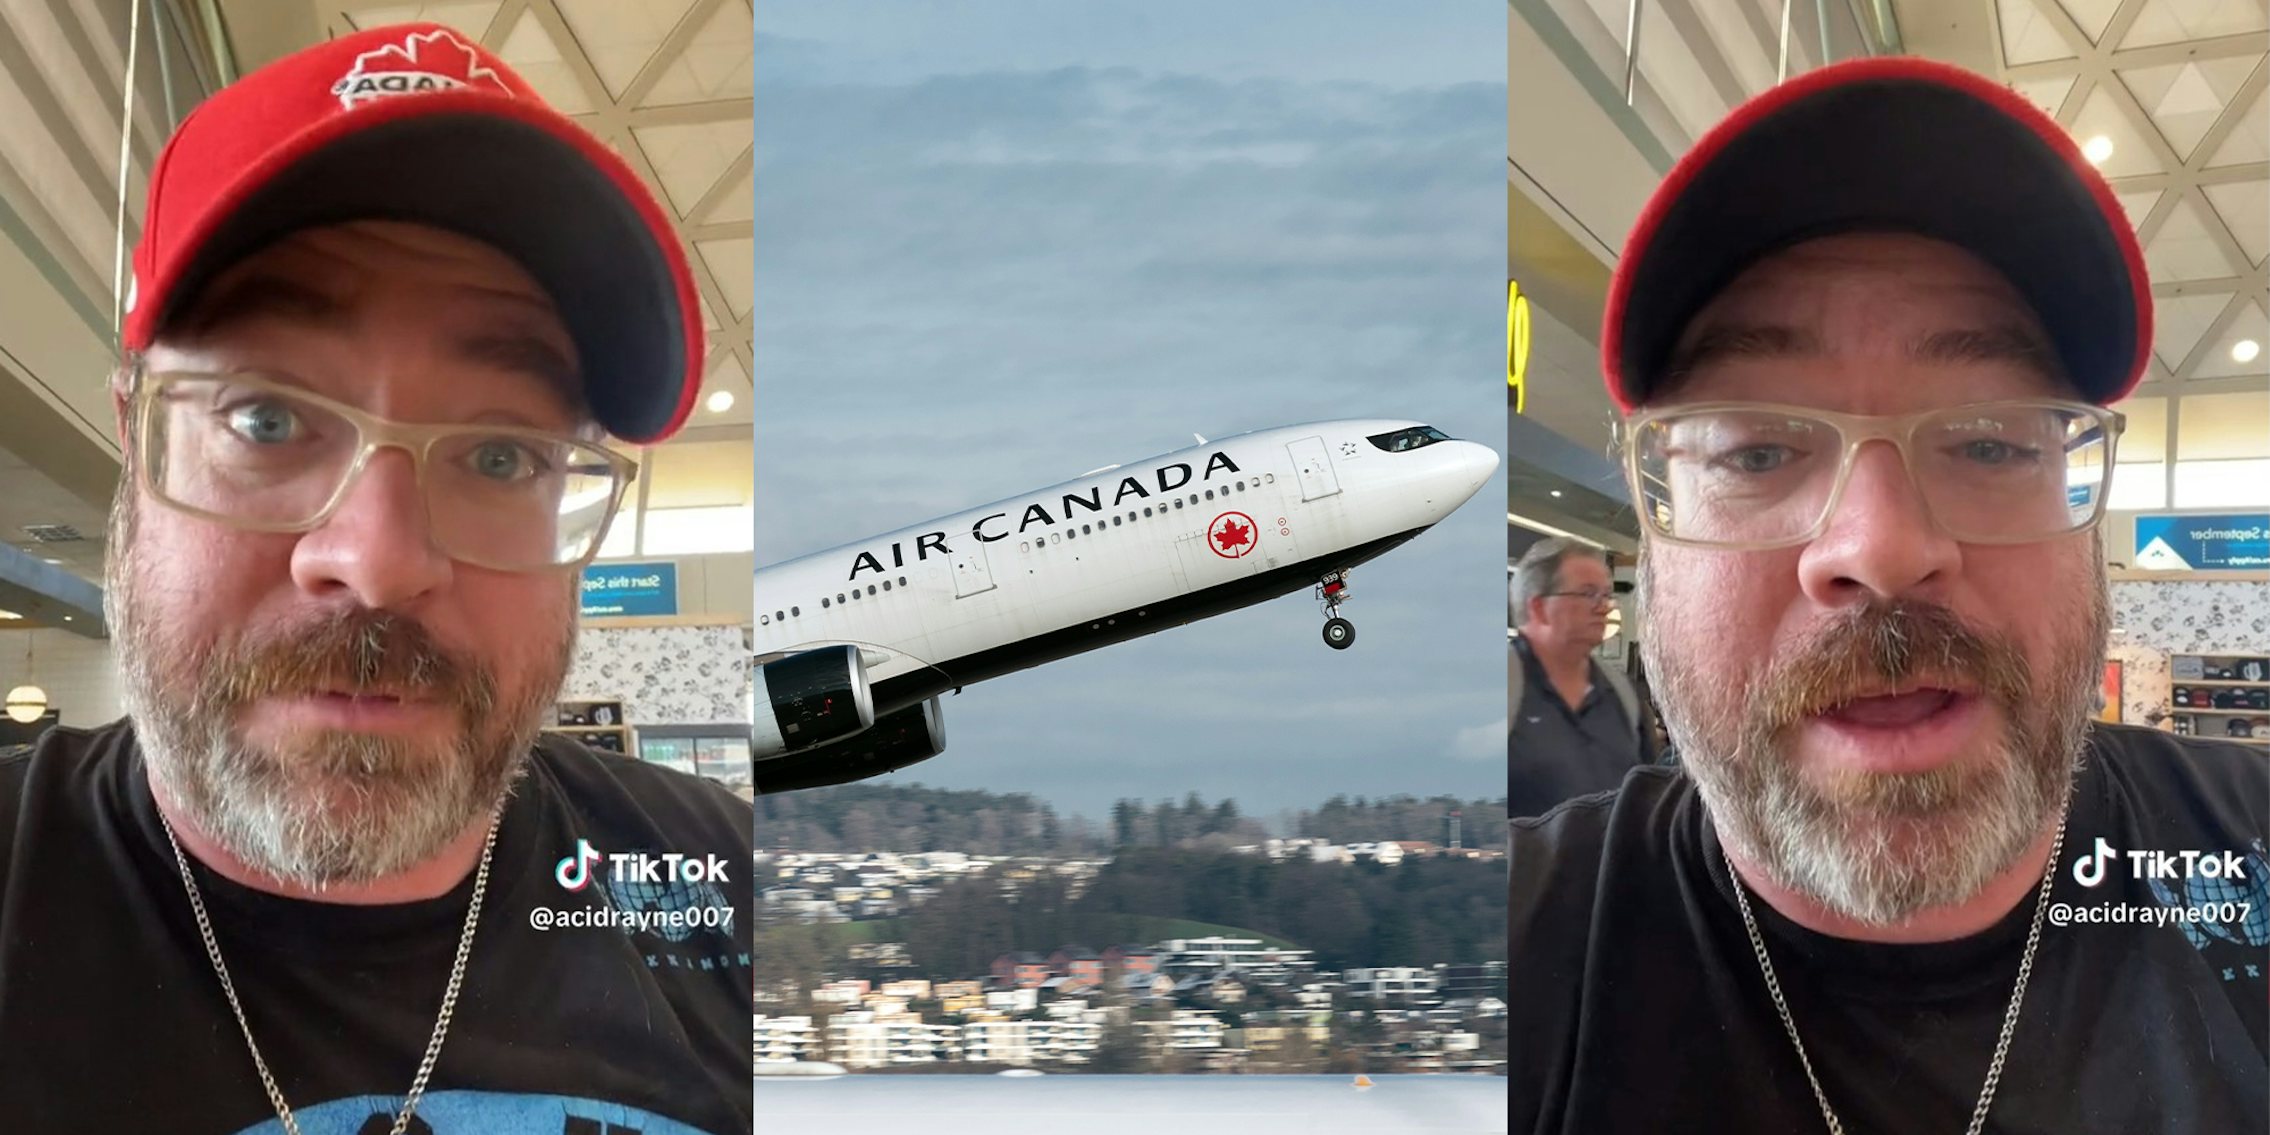 Passenger says AirCanada blacklisted him after he allegedly reported one of their flight attendants for sexual assault